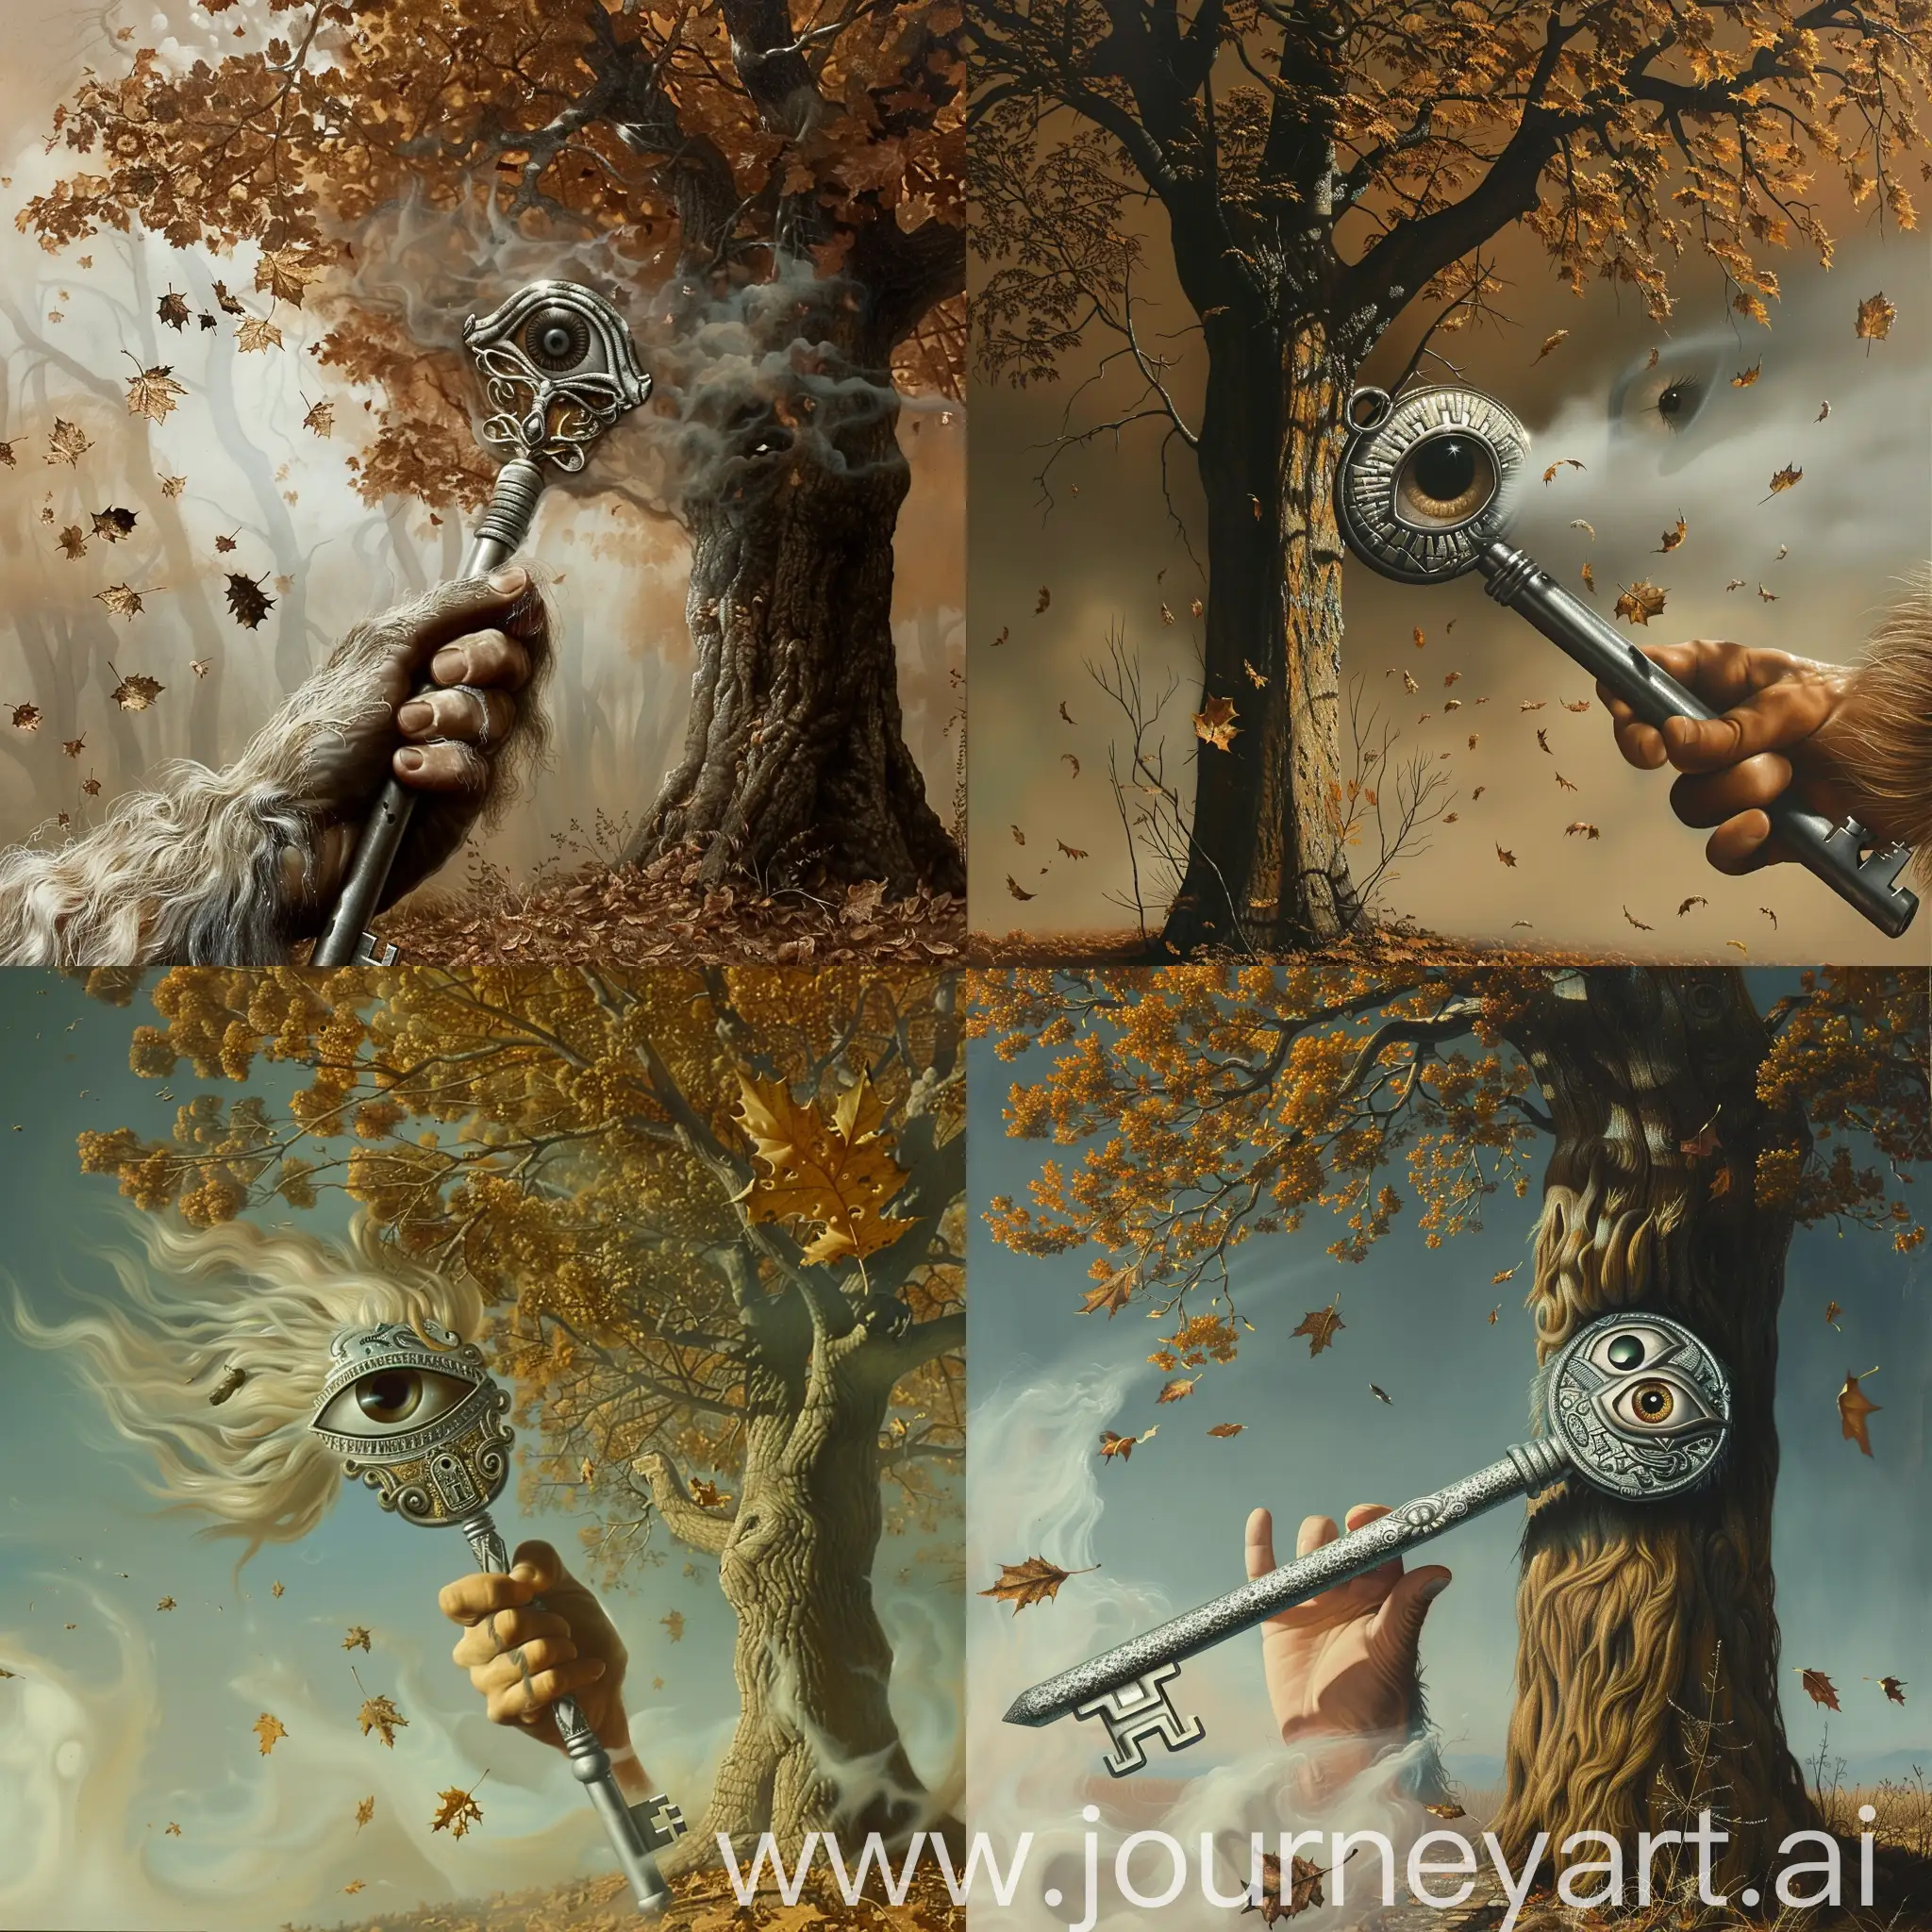 Surrealistic-Scene-Enigmatic-Hand-with-Silver-Key-and-Egyptian-Eye-in-Misty-Autumn-Landscape